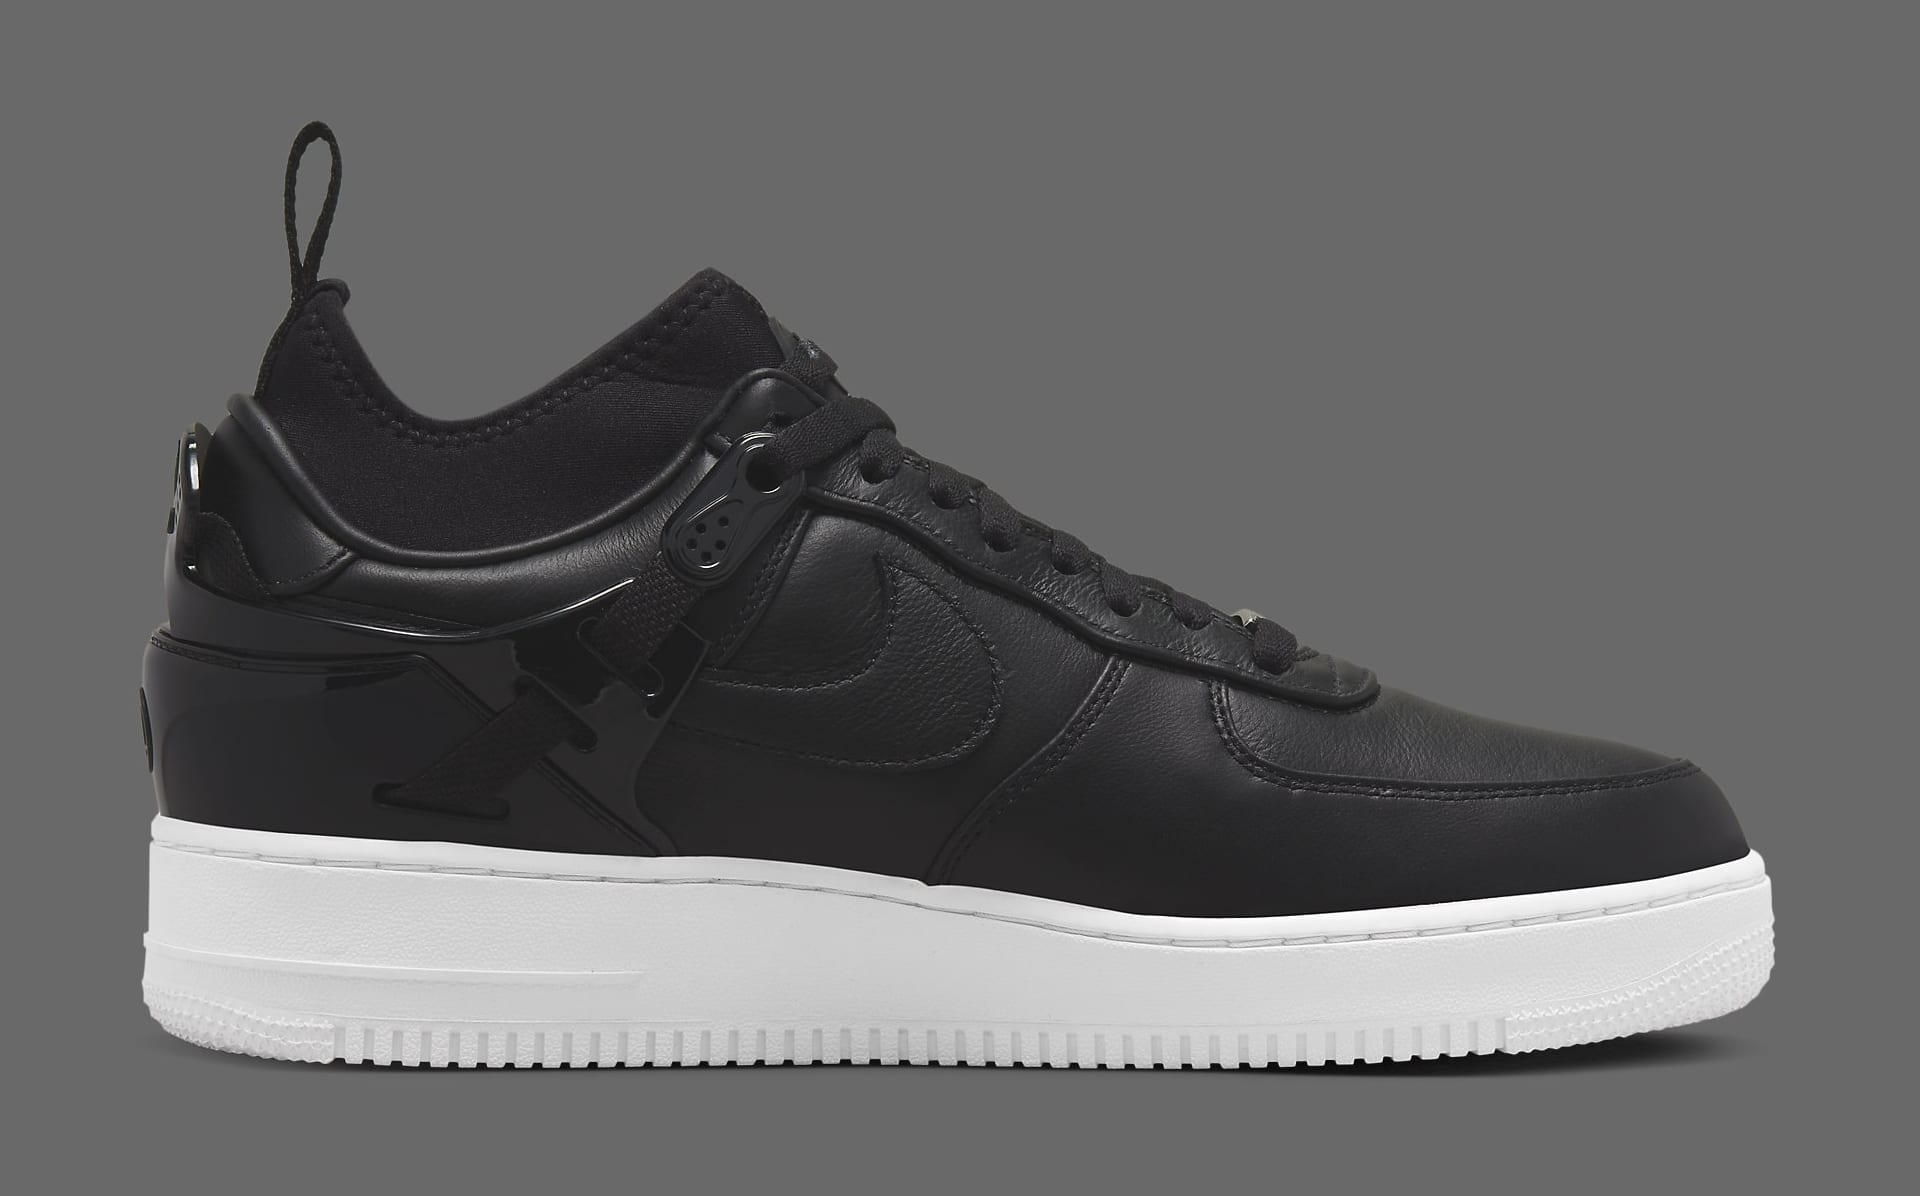 UNDERCOVER Nike Air Force 1 Spring 2022